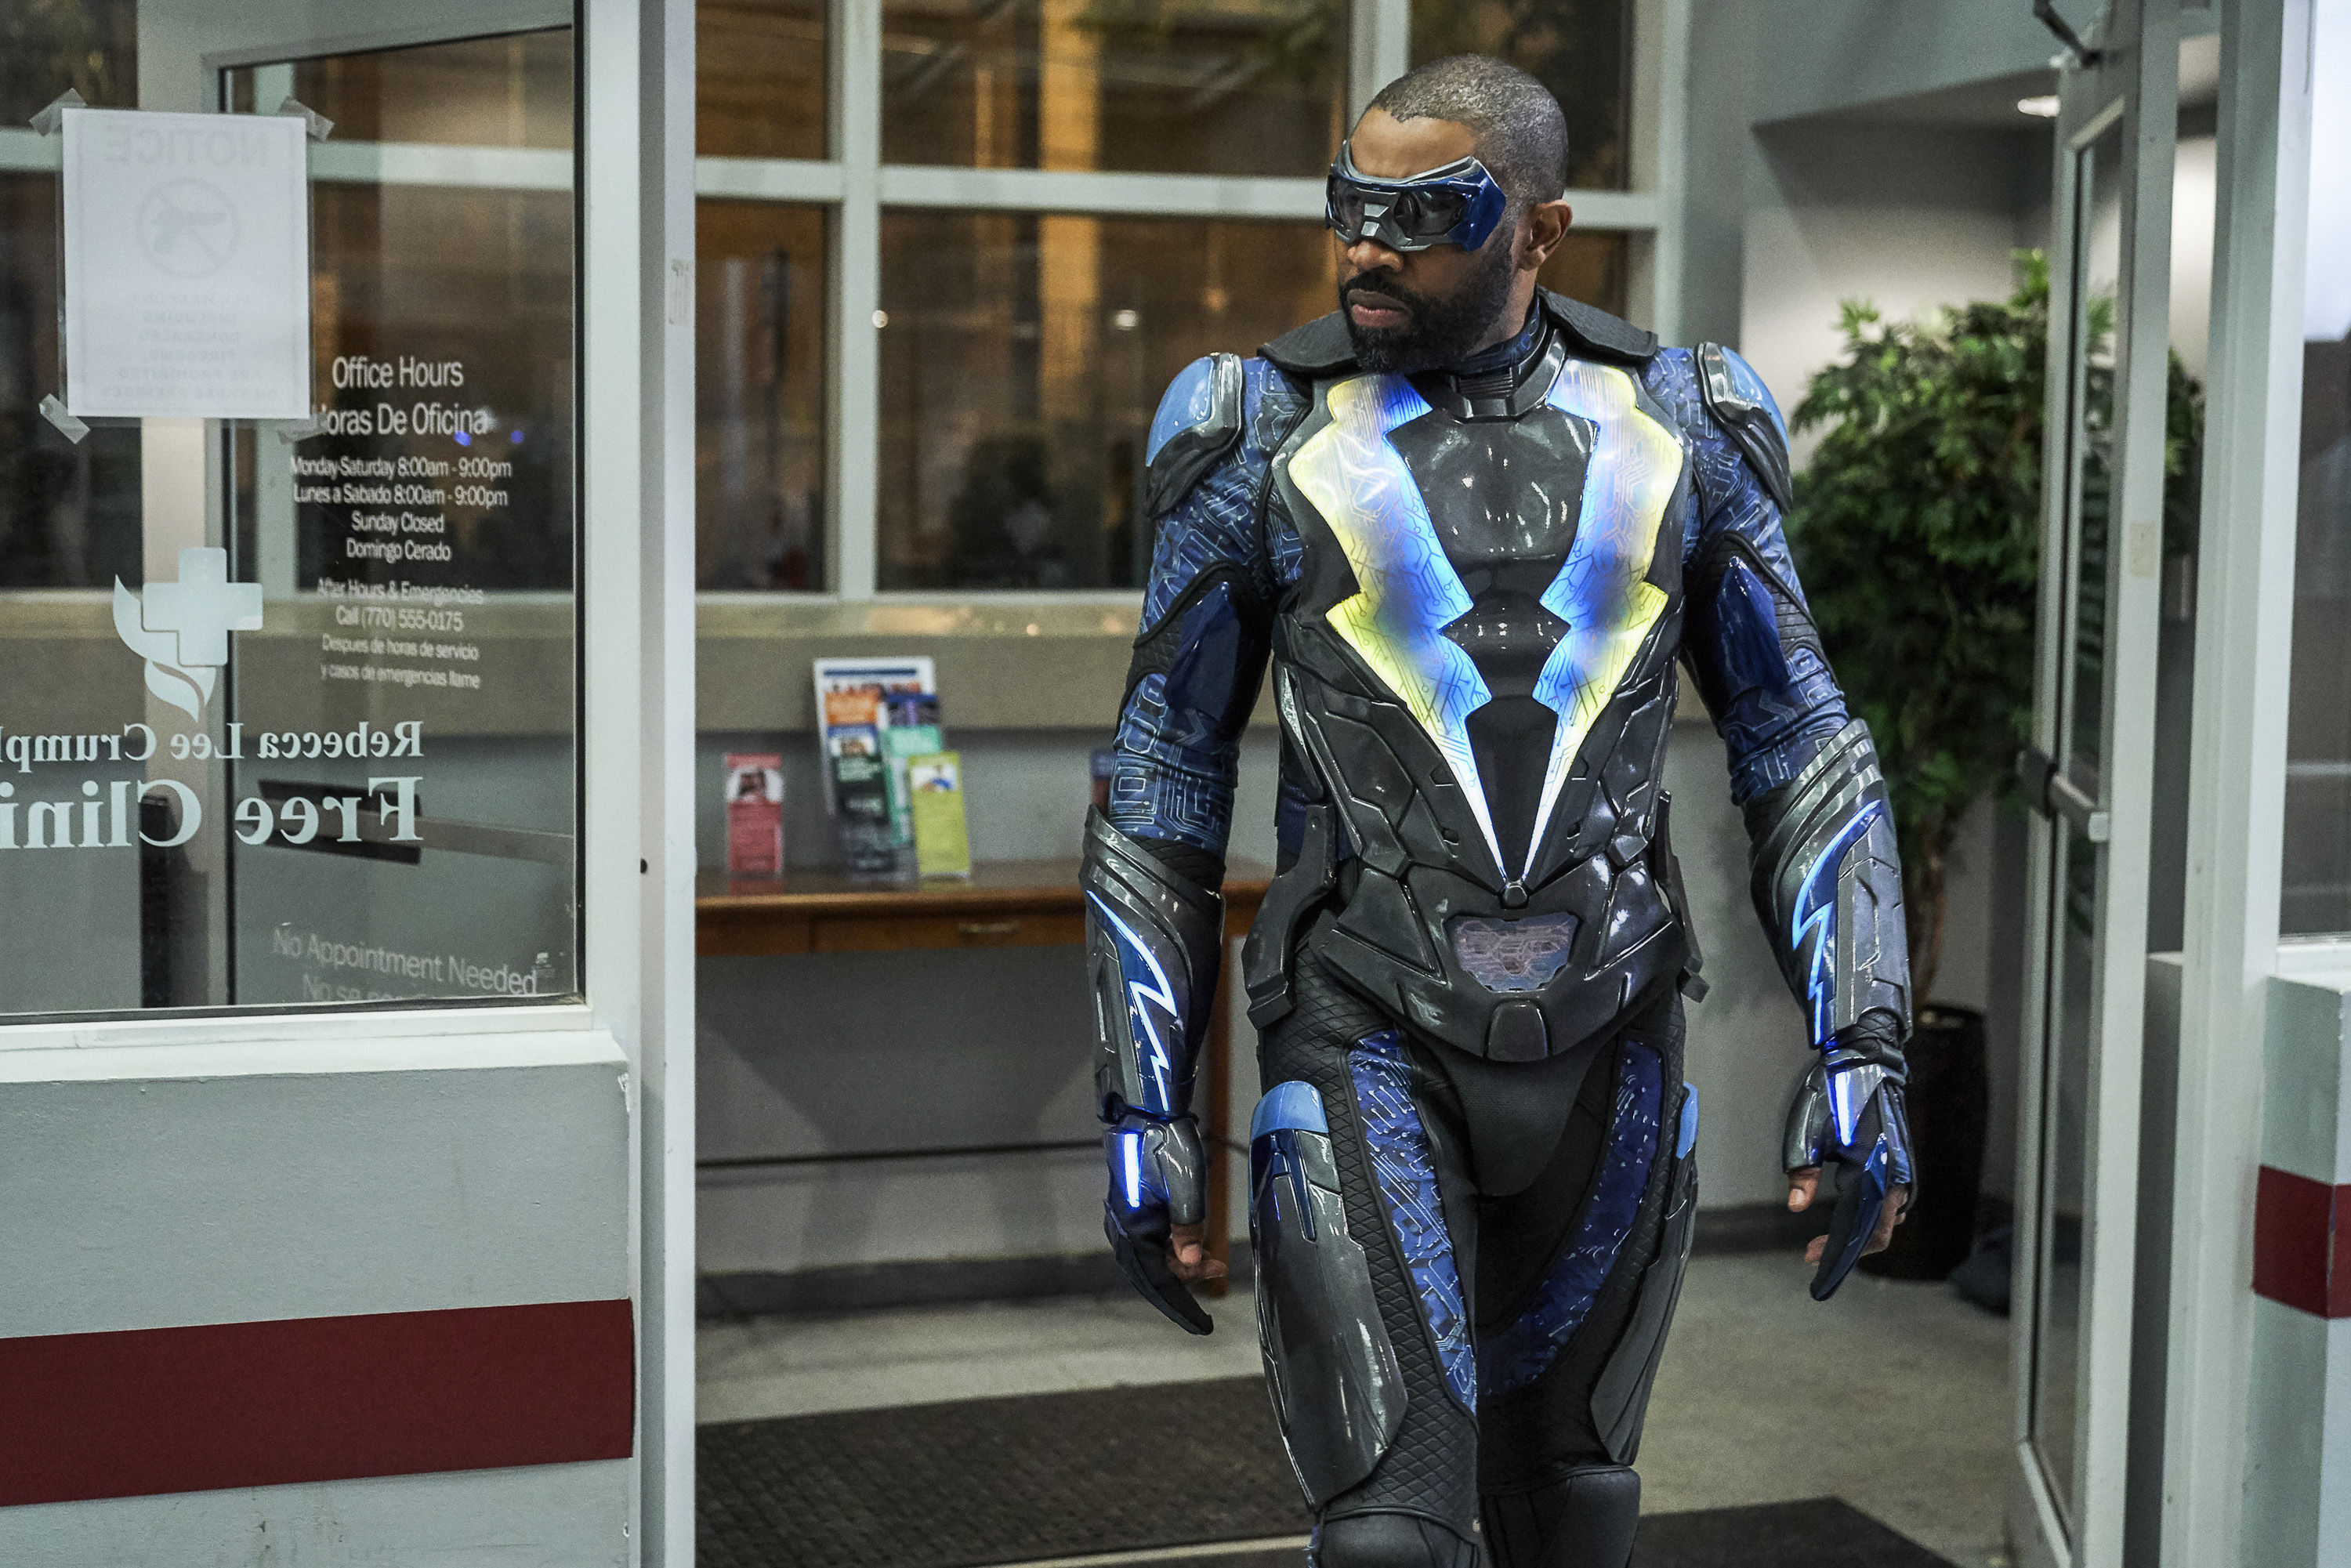 With Halloween coming up, both Black Lightning and Thunder are going to sui...